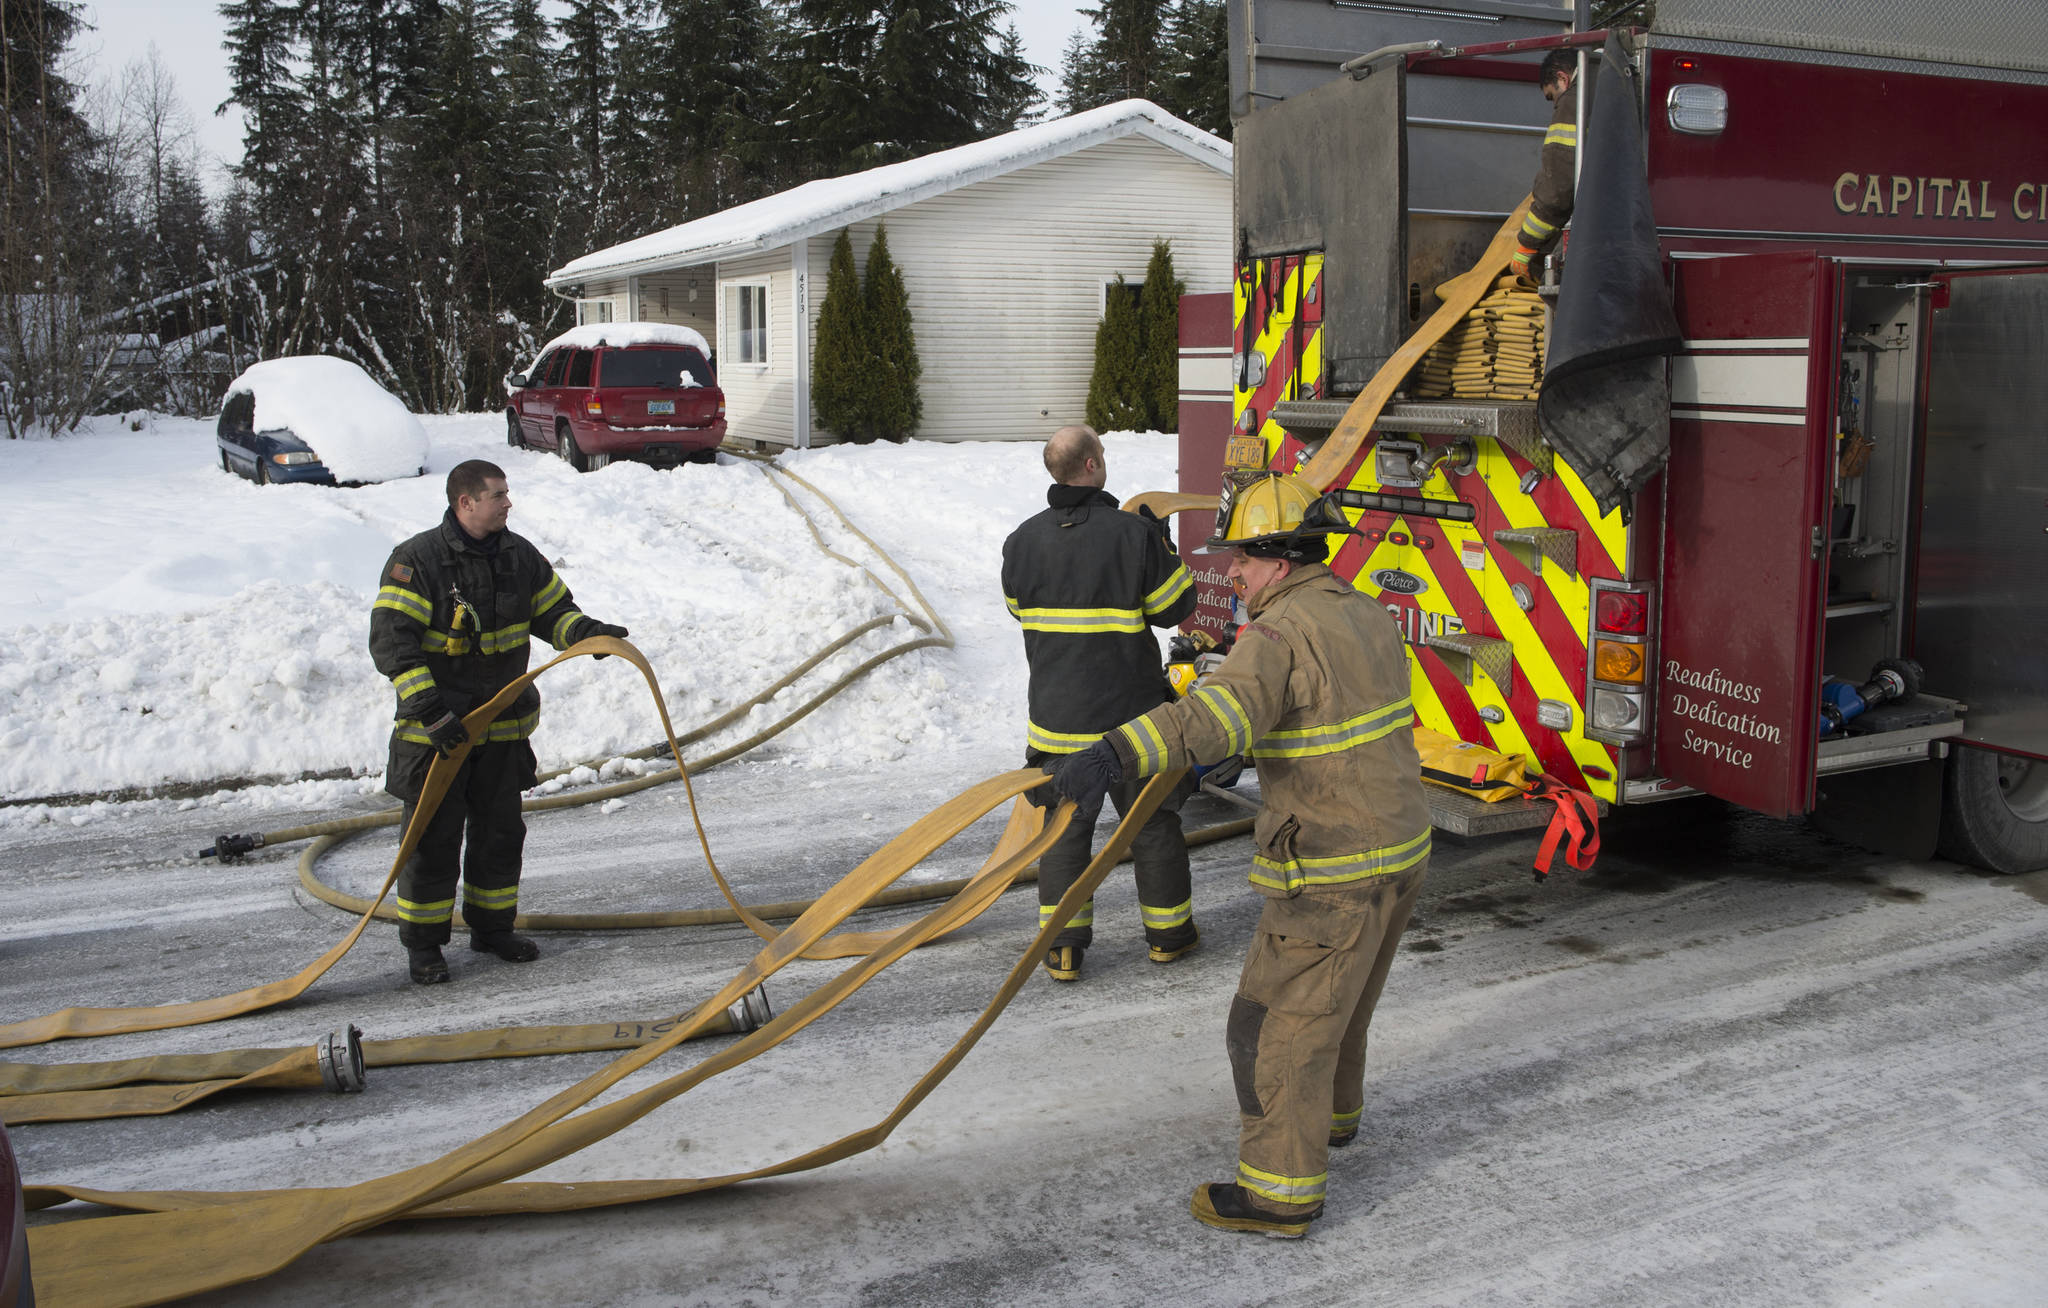 Capital City Fire/Rescue firemen pack up fire hoses after responding to a house fire at 4513 Kanata Street on Wednesday, Feb. 14, 2018. (Michael Penn | Juneau Empire)